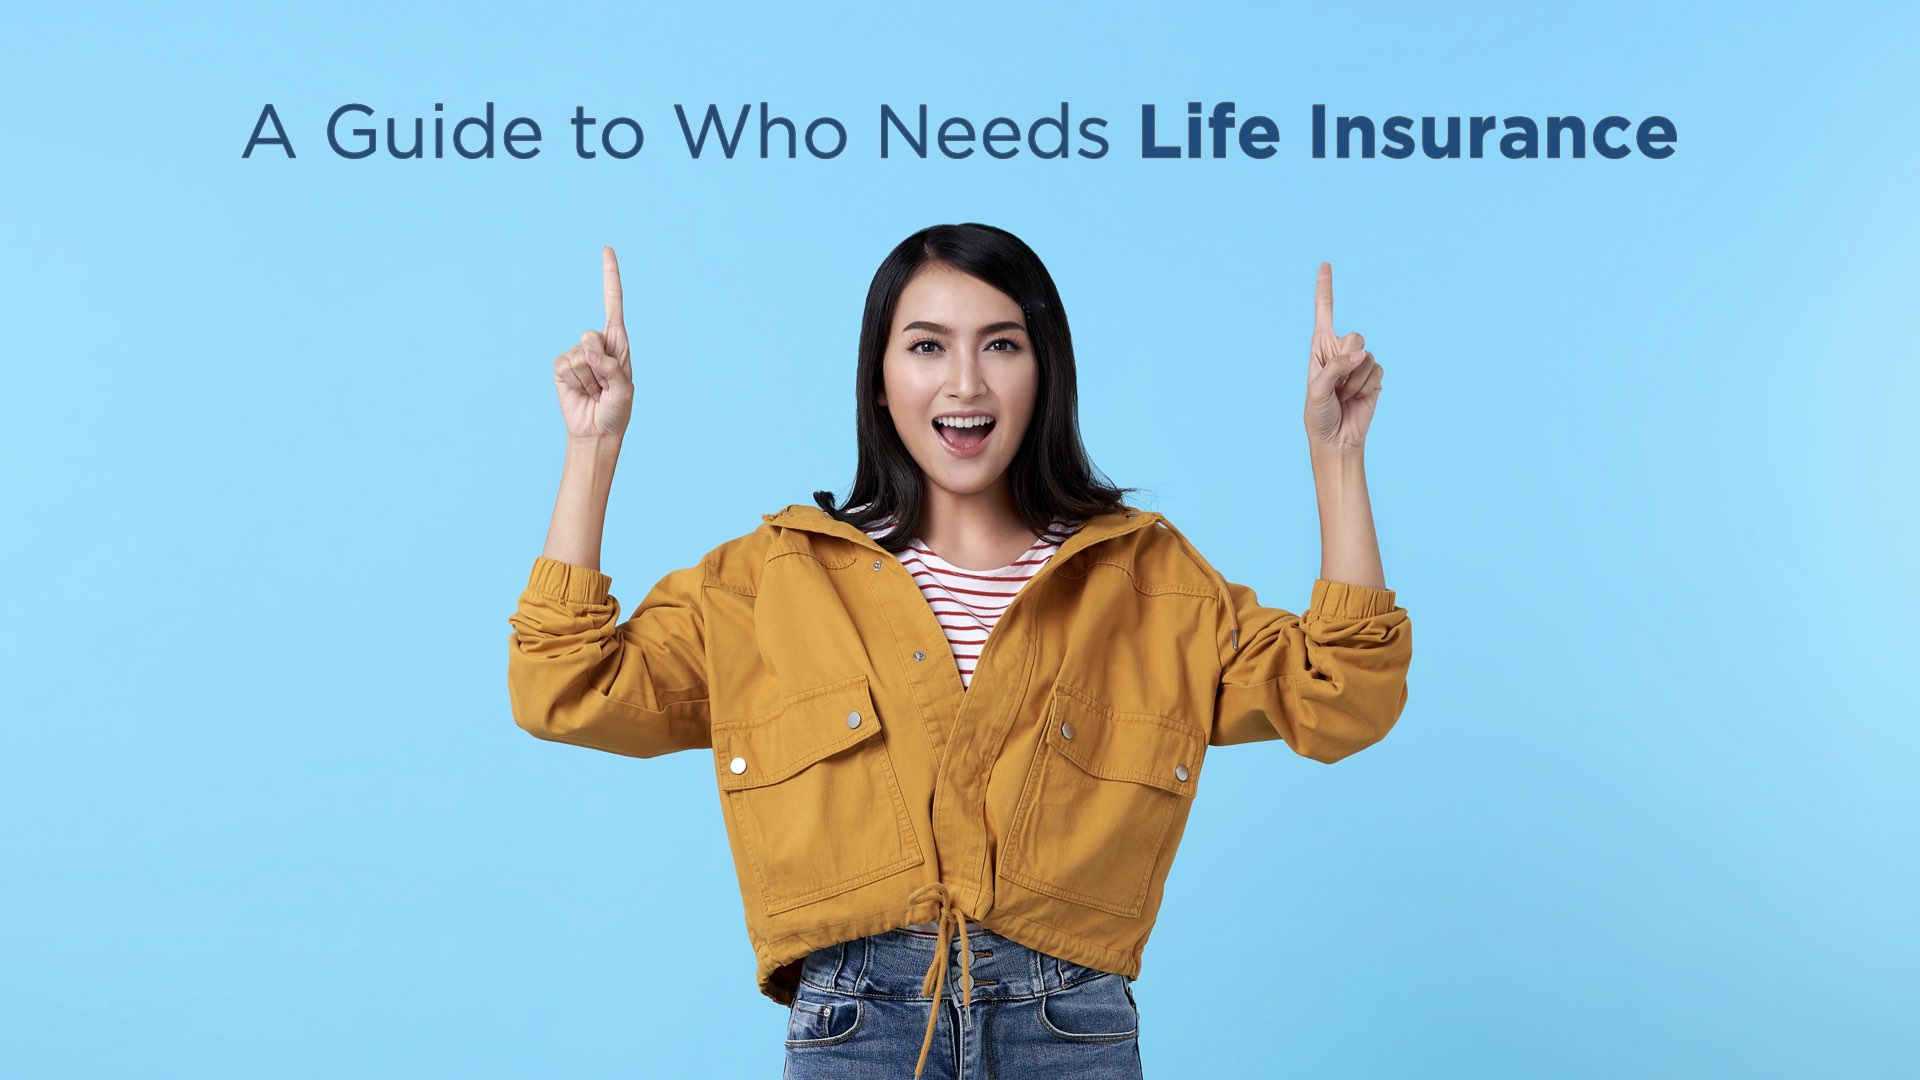 How to Know If You Need Life Insurance